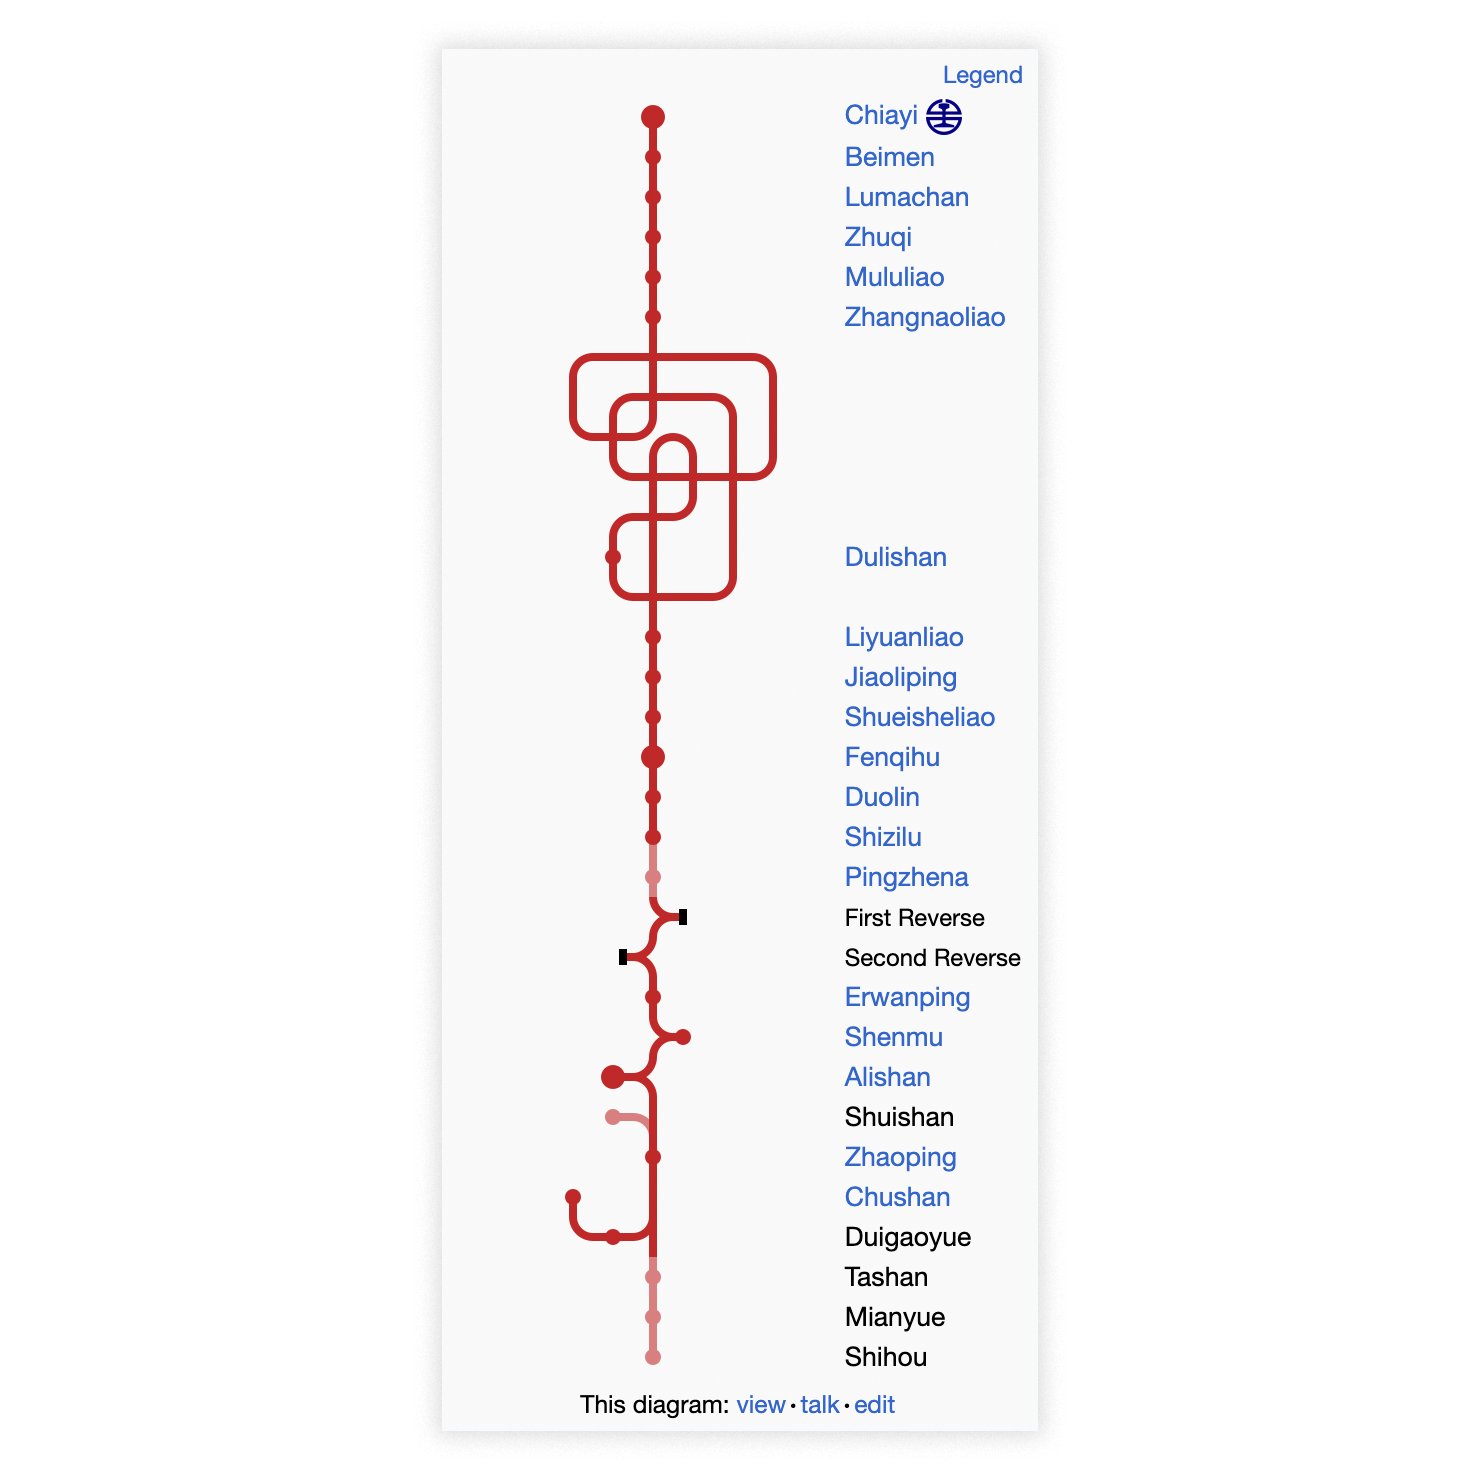 Transit Maps on X: This Wikipedia route diagram of the Alishan